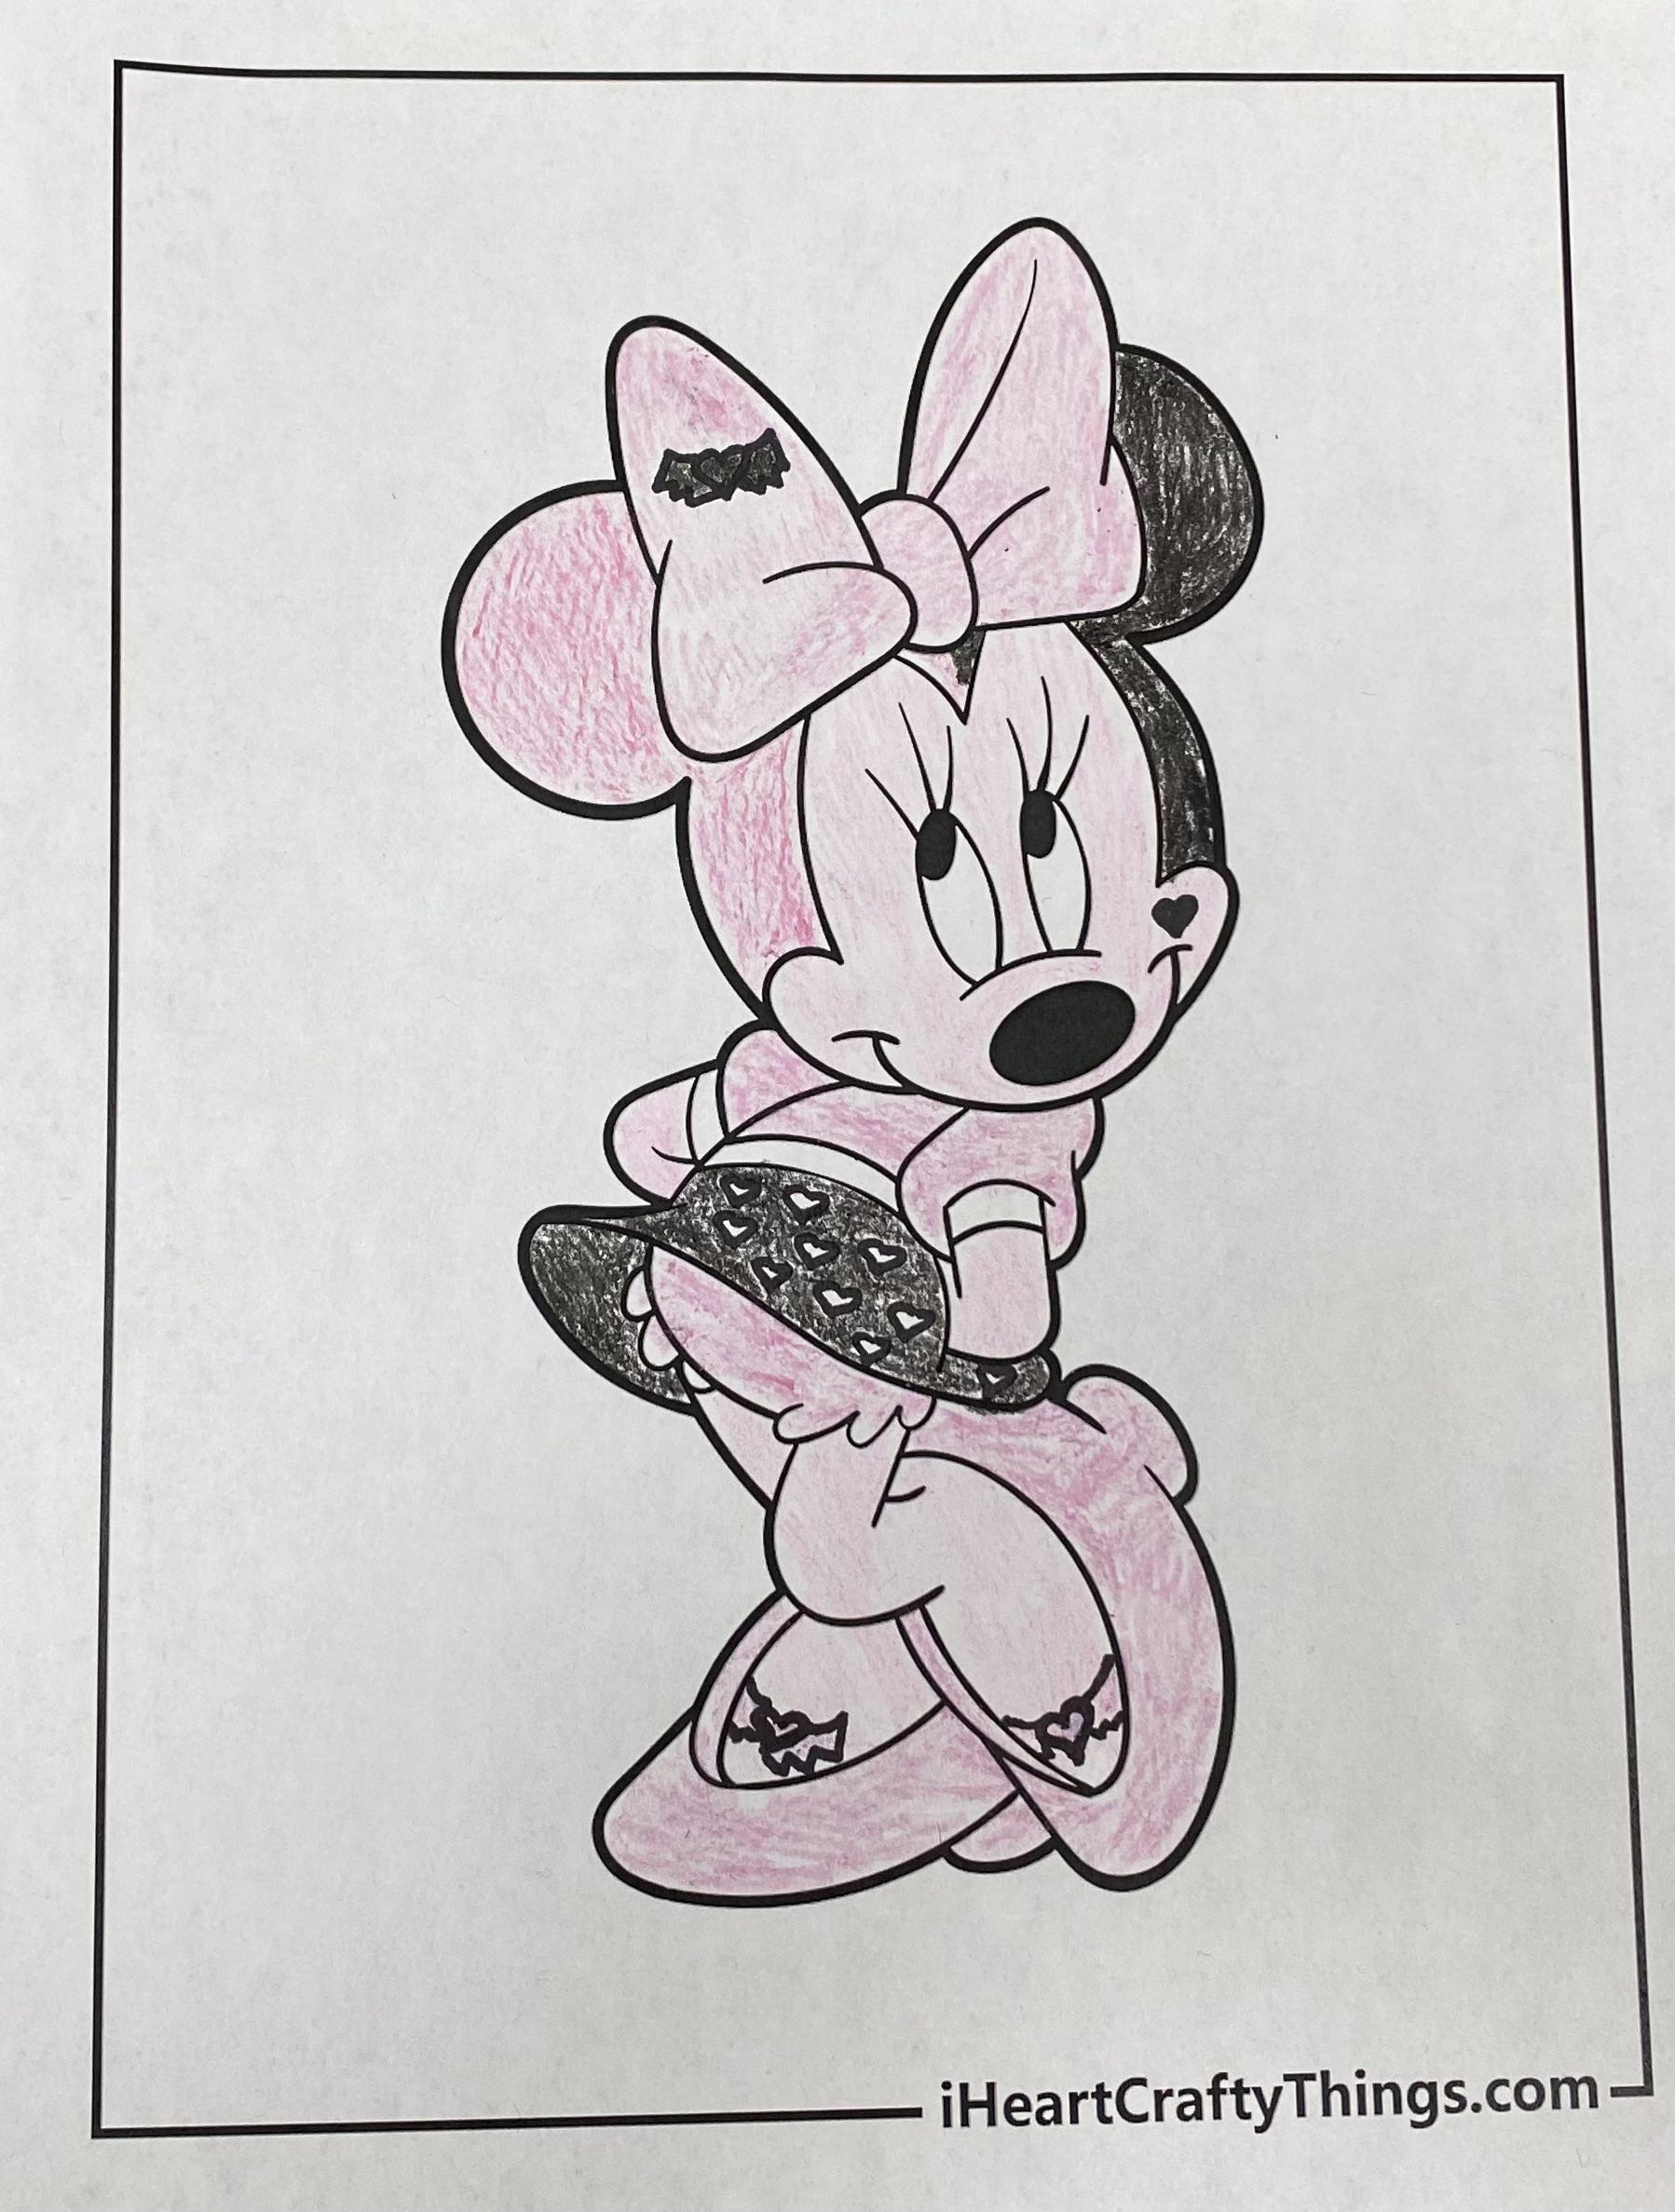 Minnie mouse coloring page with draculaura g colors pleted with a black permanent marker crayola crayons and cent crayons ð rcoloring